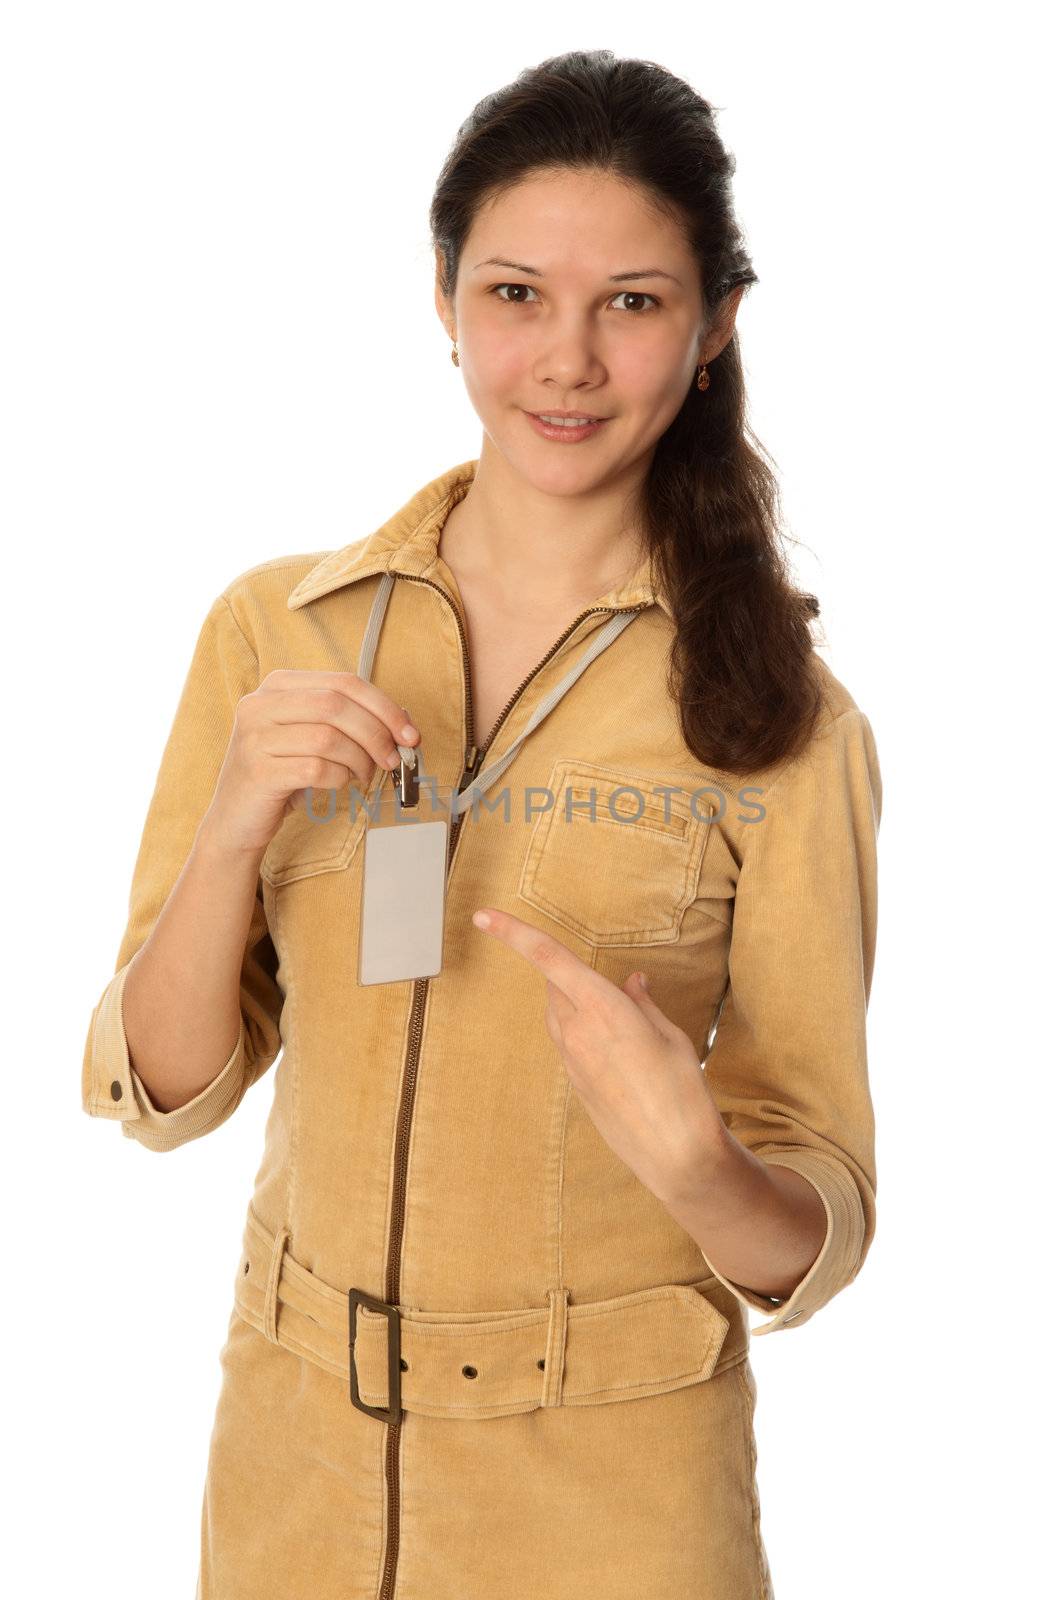 woman showing her badge at the entrance of meeting room